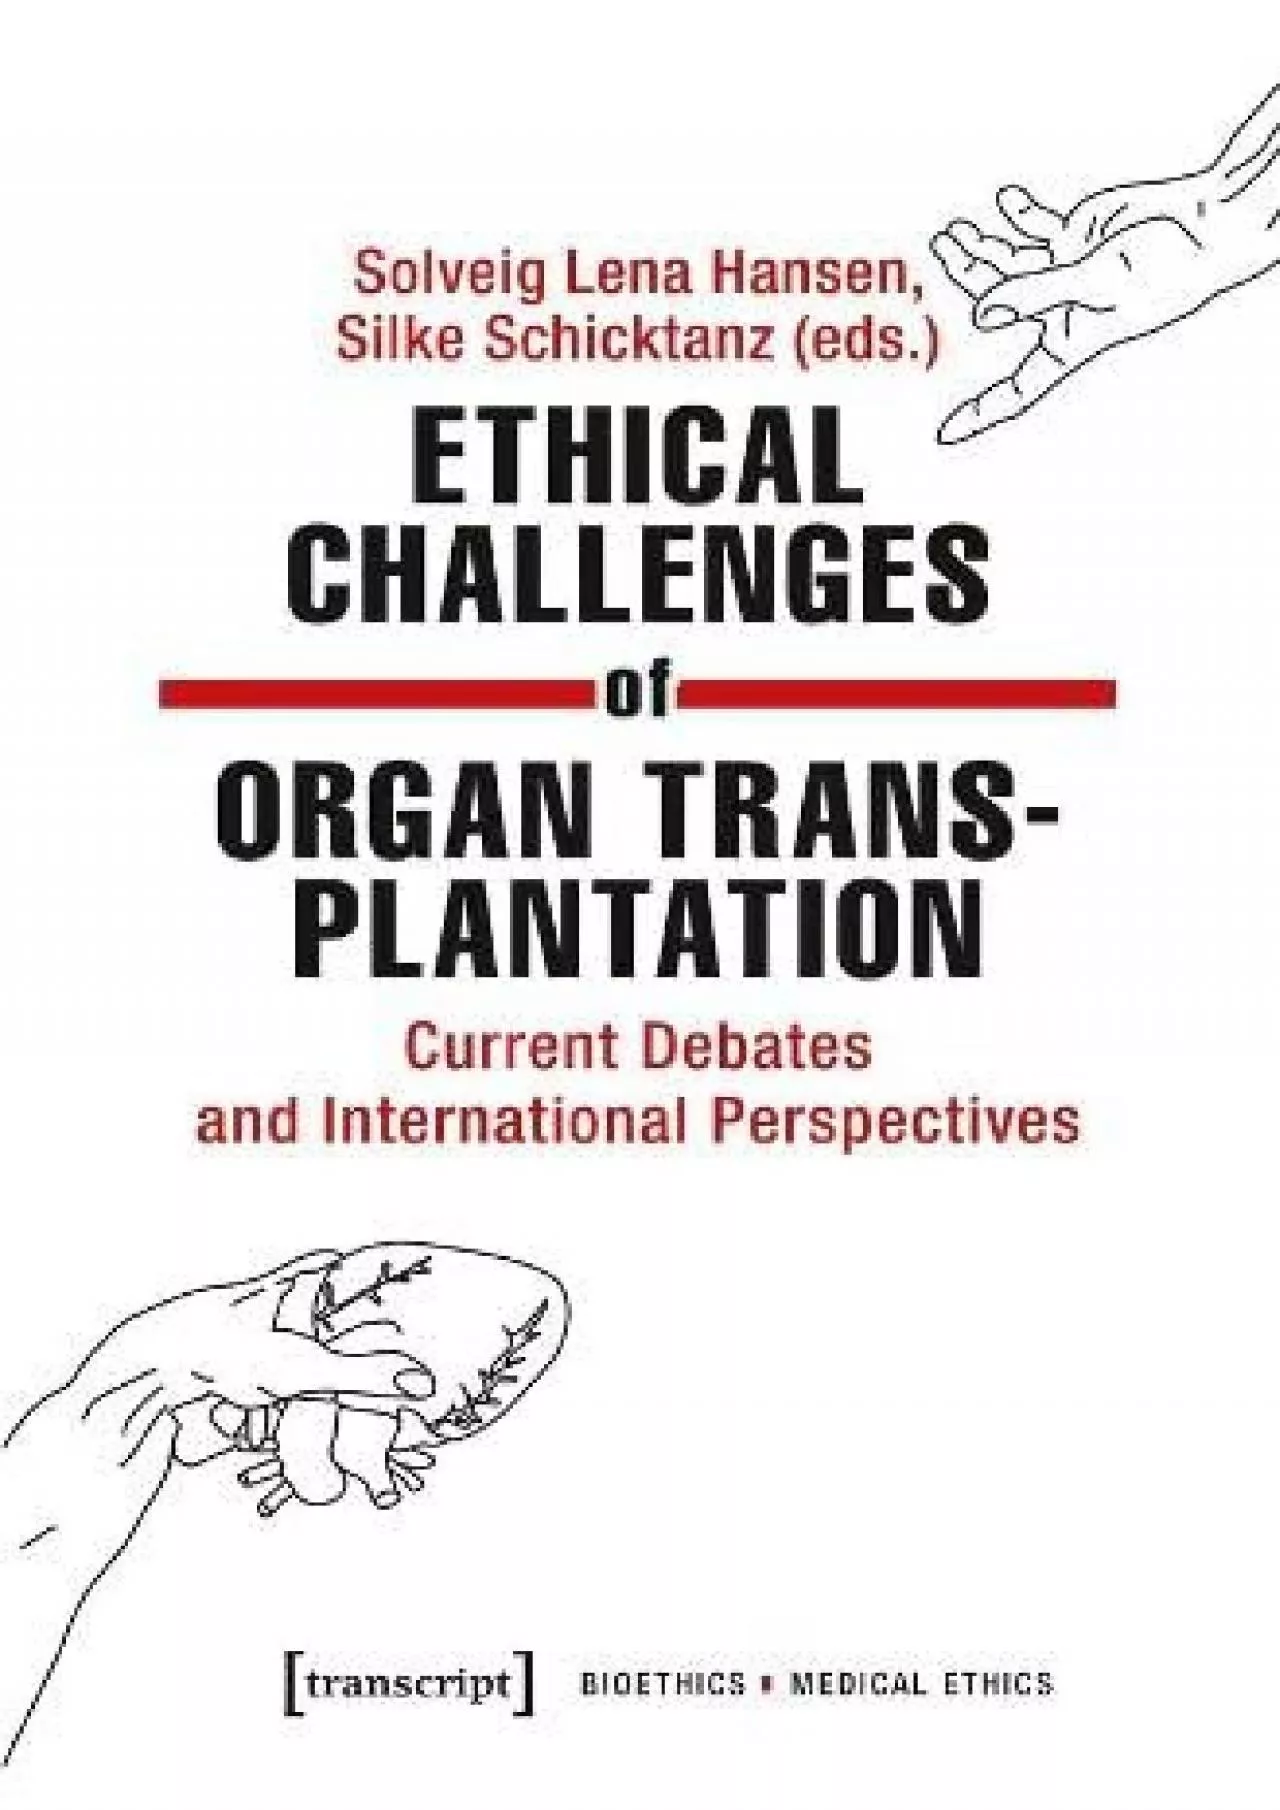 (BOOK)-Ethical Challenges of Organ Transplantation: Current Debates and International